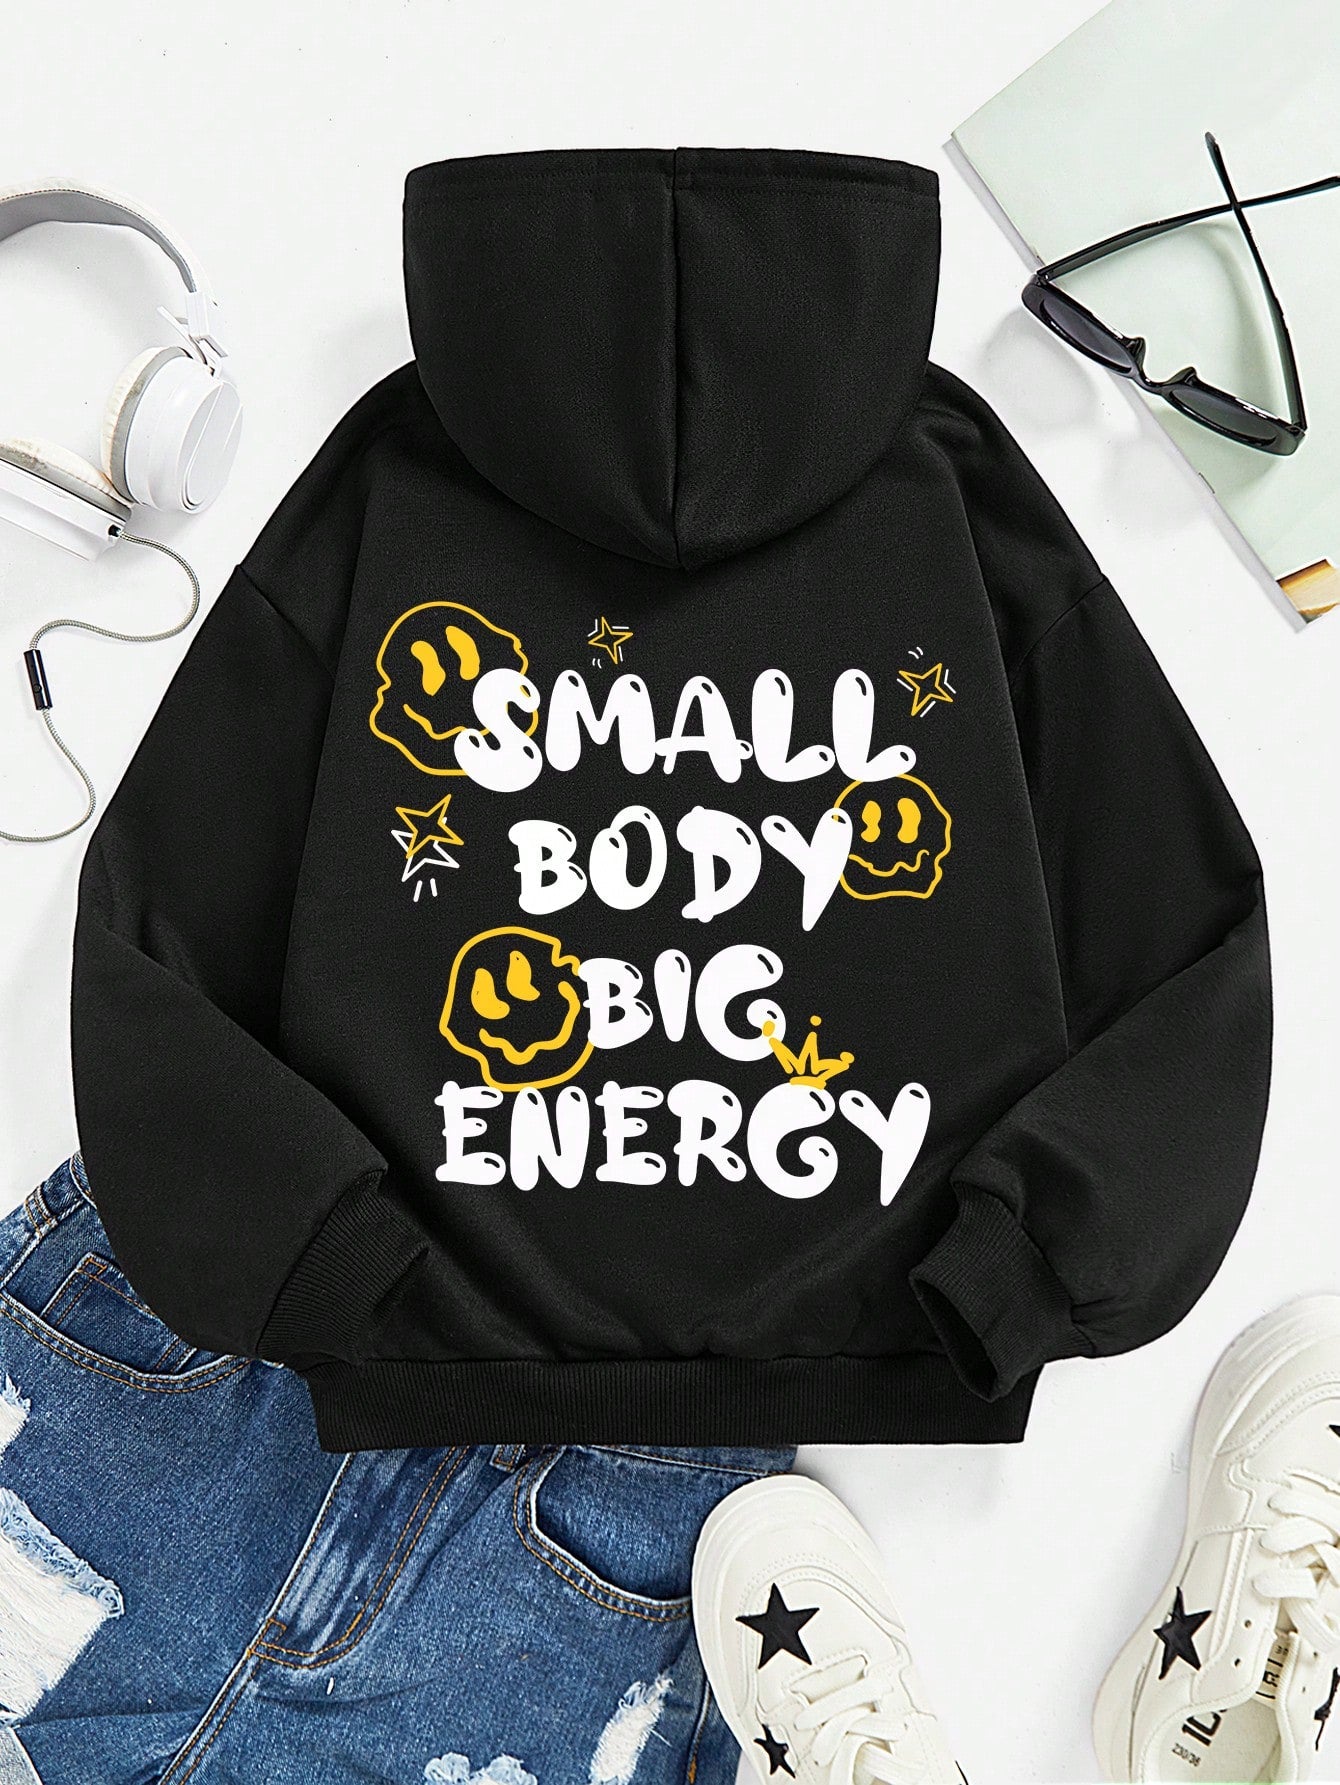 Girls Small Body Big Energy Loose Fit Casual Hoodie